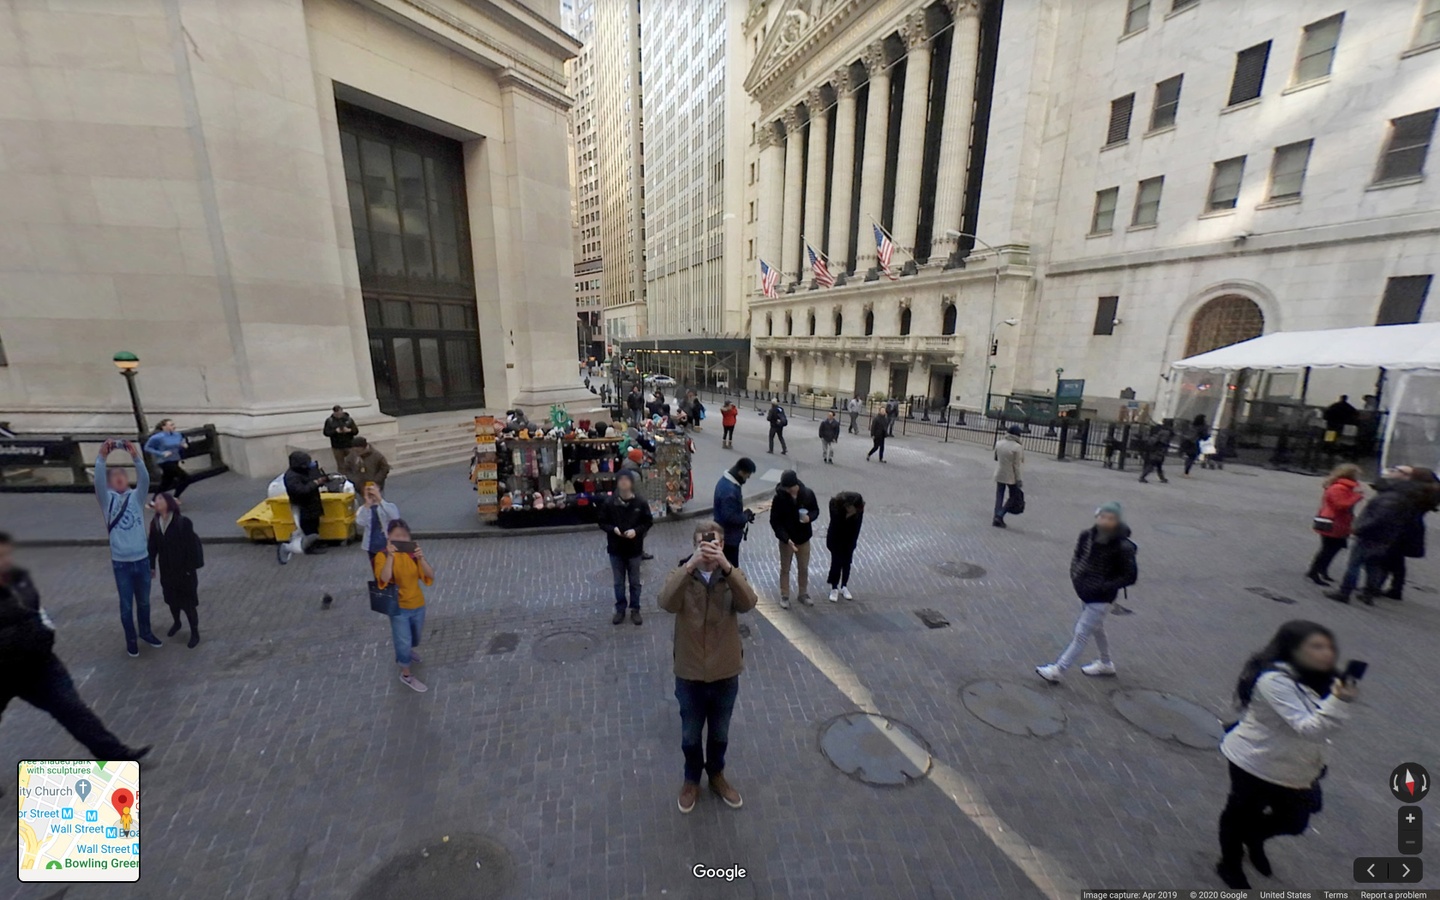 Screencap of Google Street View on a bricked street area with neoclassical federal buildings. Pedestrians walk along the sidewalks and in the streets. Several people are stopped, taking photos of the Google Street View camera with their phones.